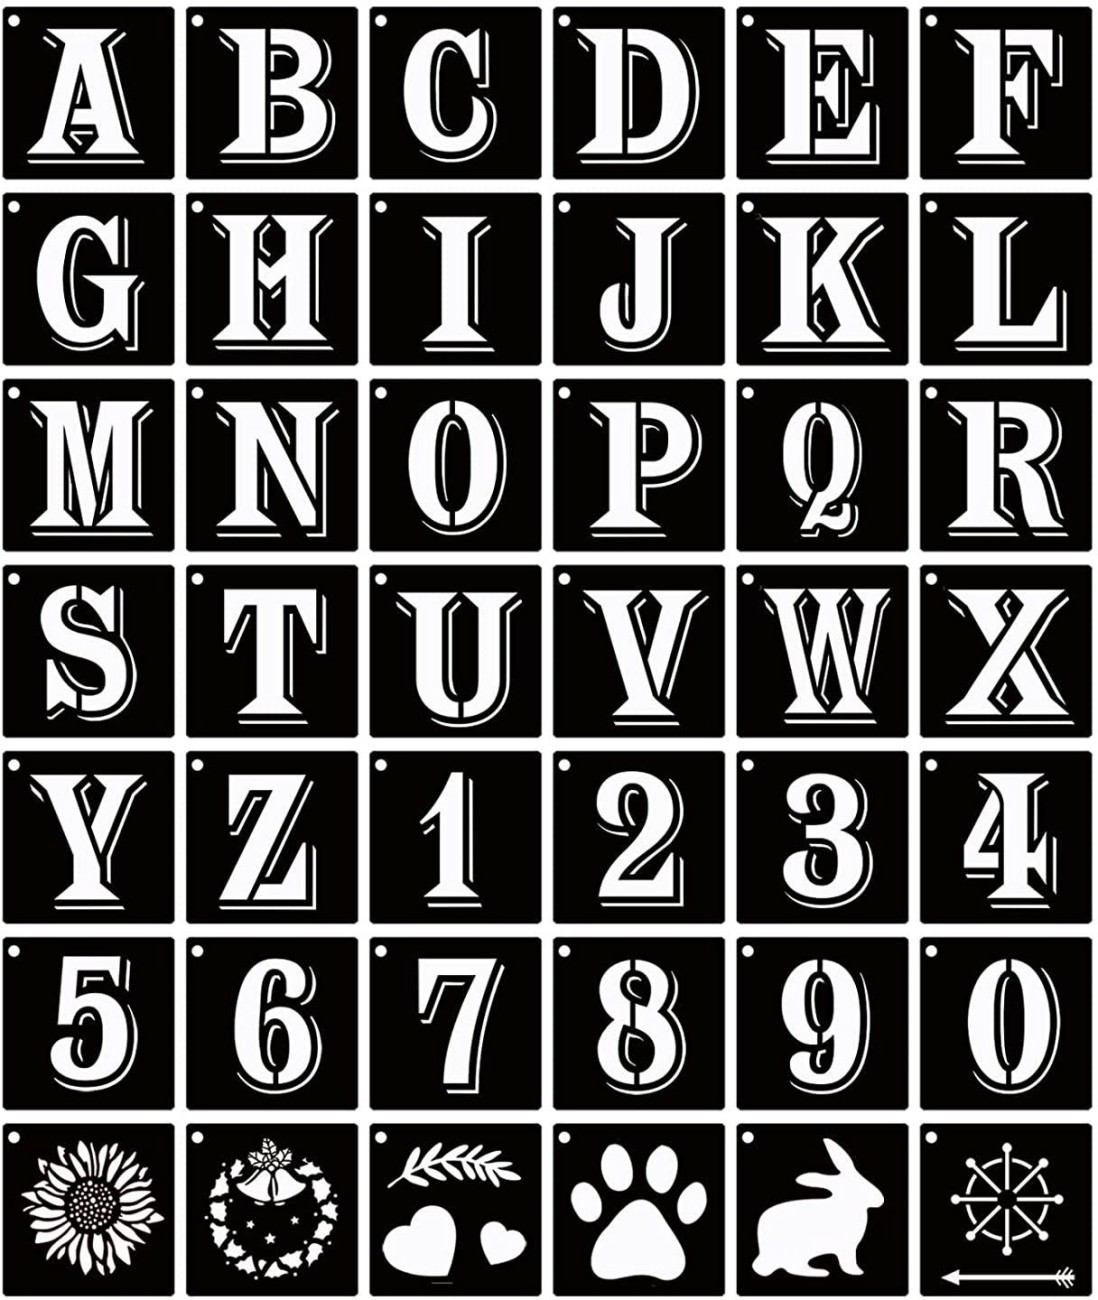 4 Inch Letter Stencils Symbol Numbers Craft Stencils, 42 Pcs Reusable  Alphabet Templates Interlocking Stencil Kit for Painting on Wood, Wall,  Fabric